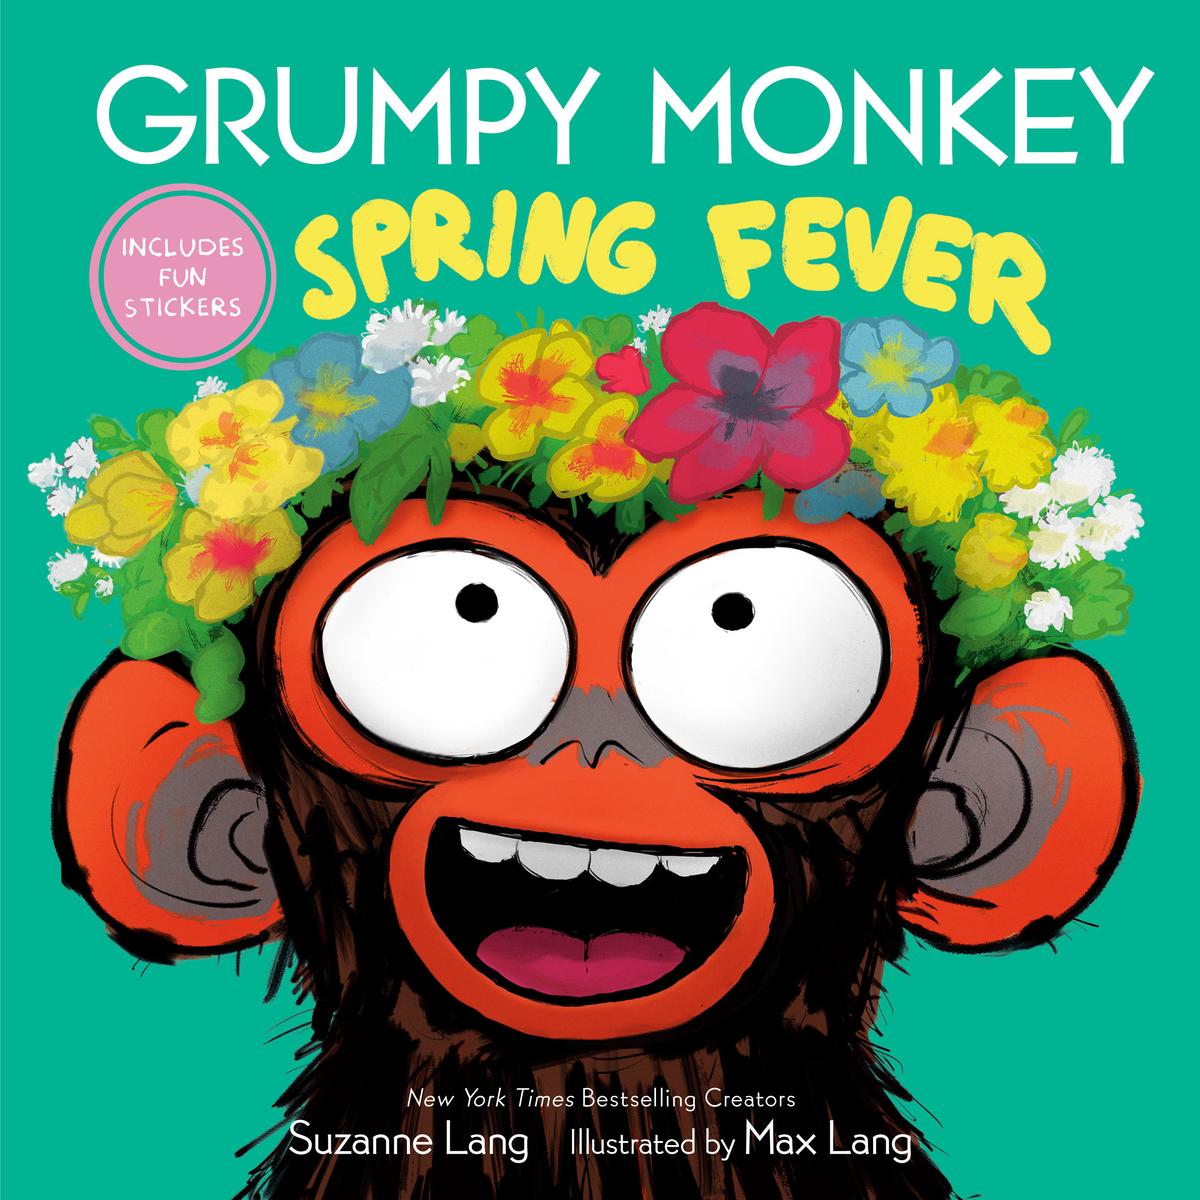 Grumpy Monkey Spring Fever - Includes Fun Stickers and Hidden Easter Eggs!